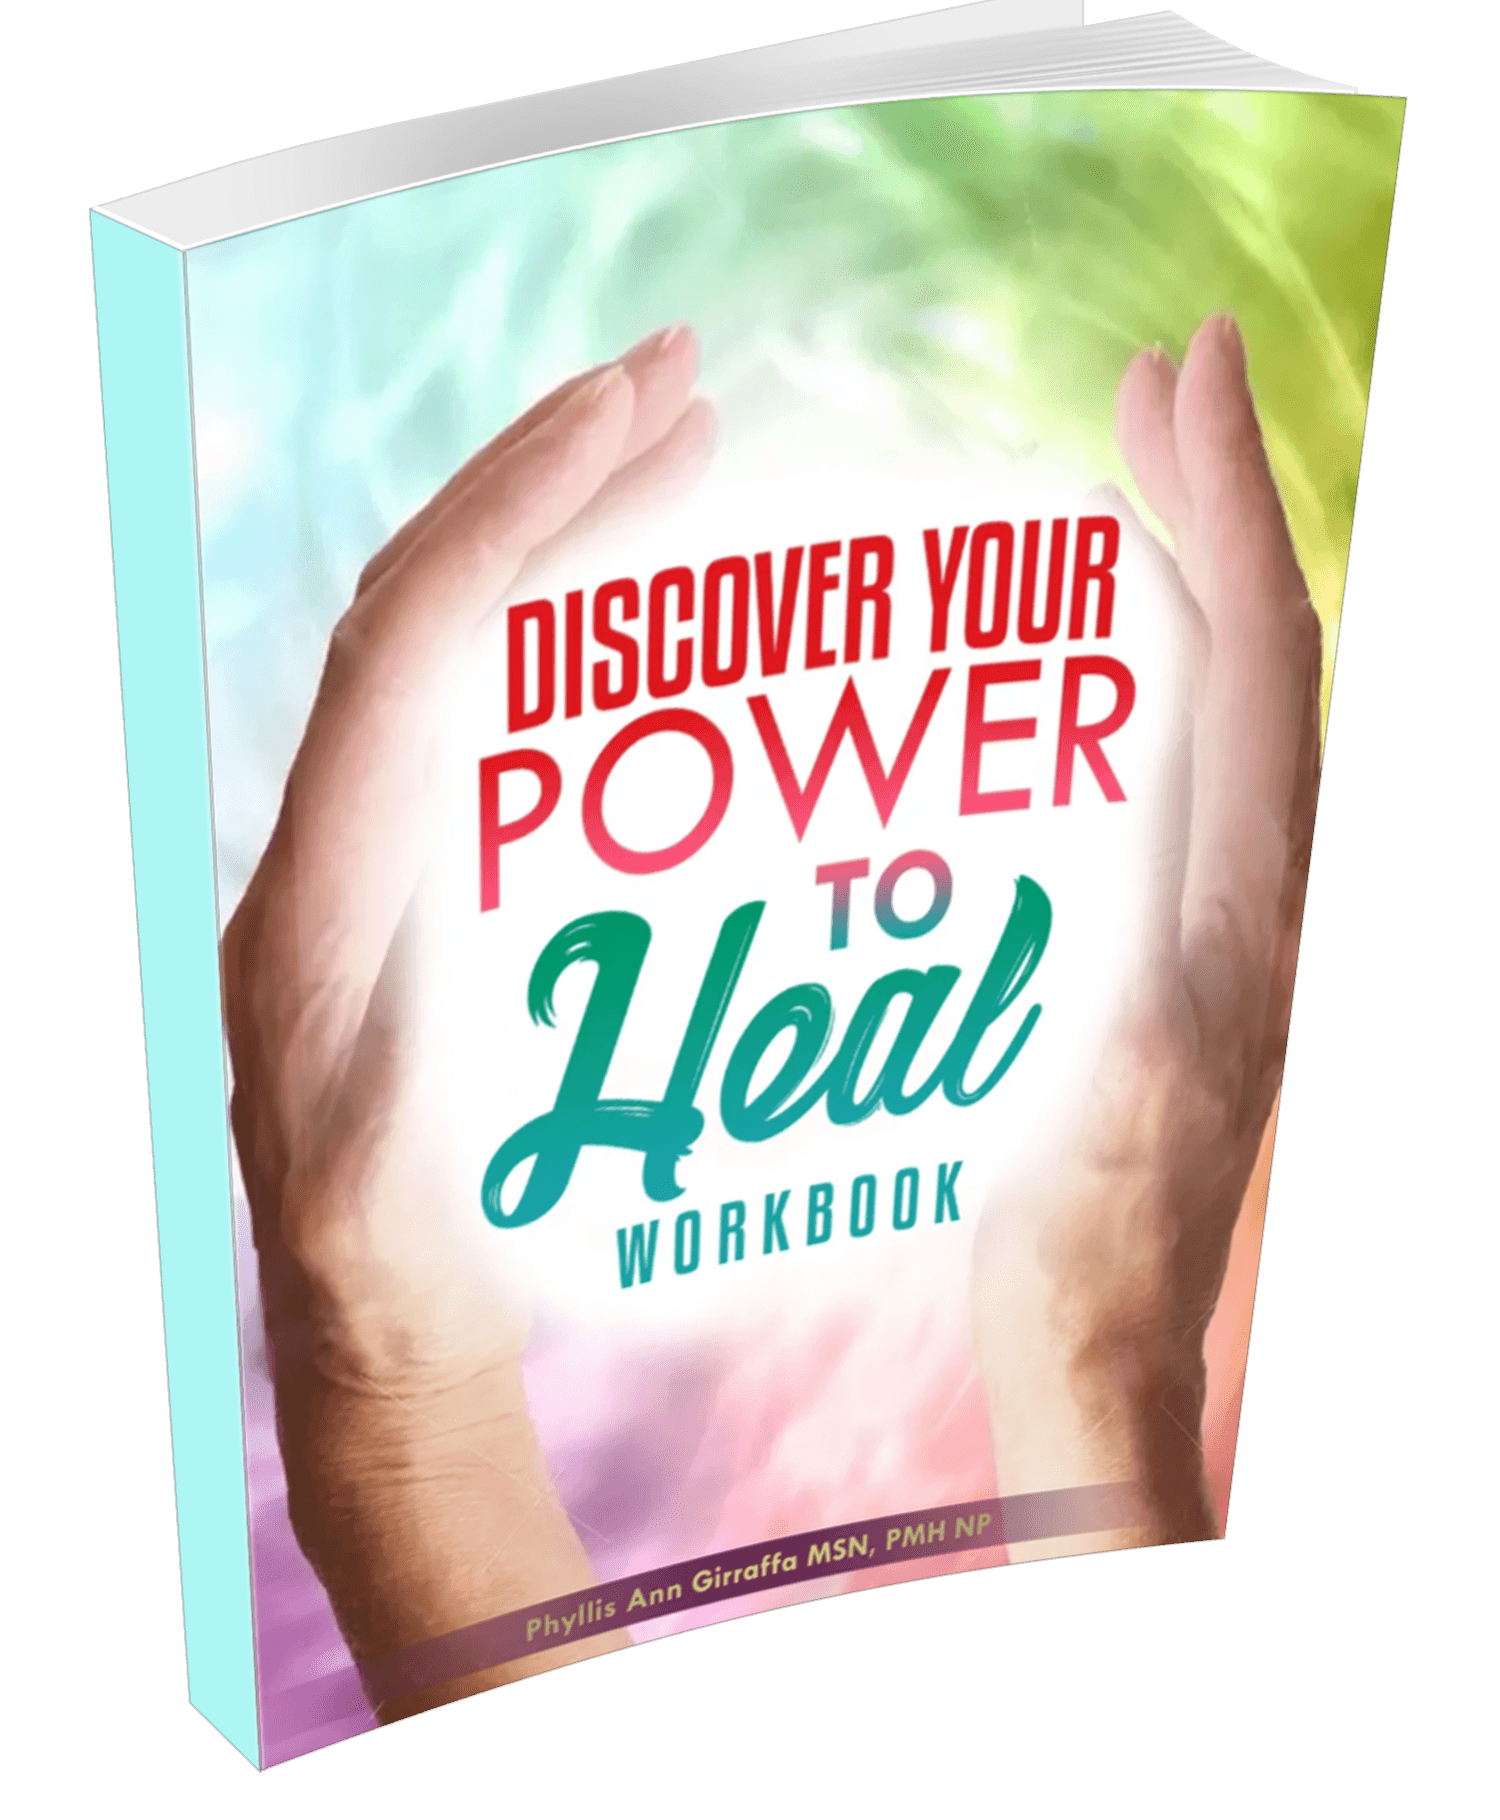 Discovery your Power to Heal Workbook